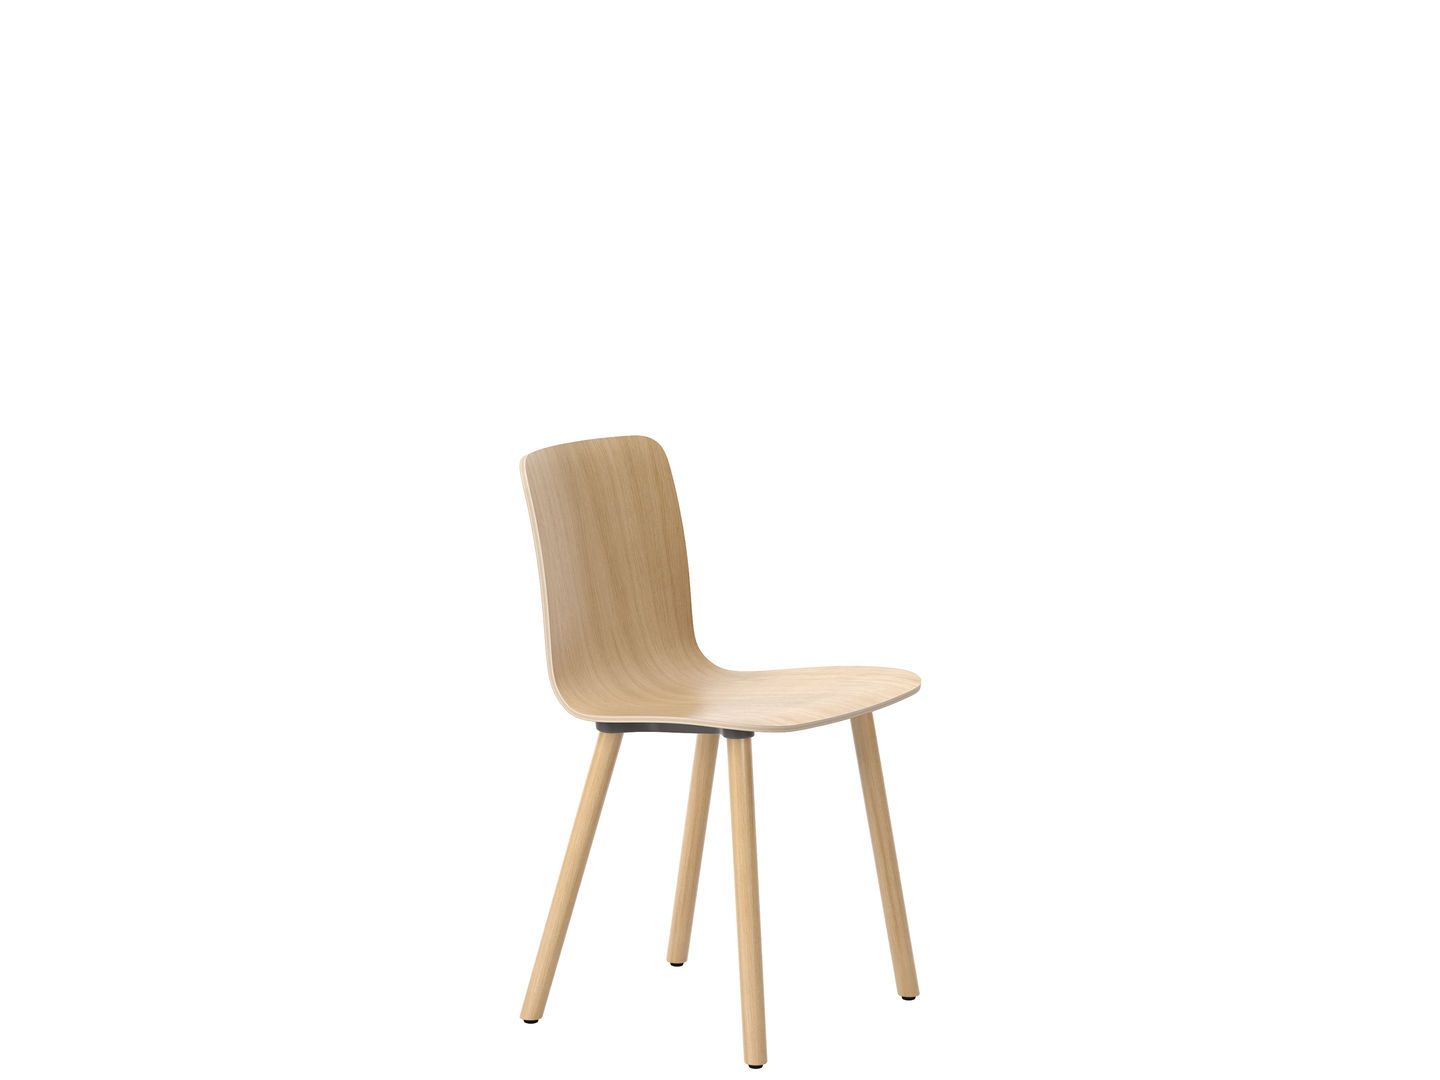 HAL Ply Wood | One52 Furniture 